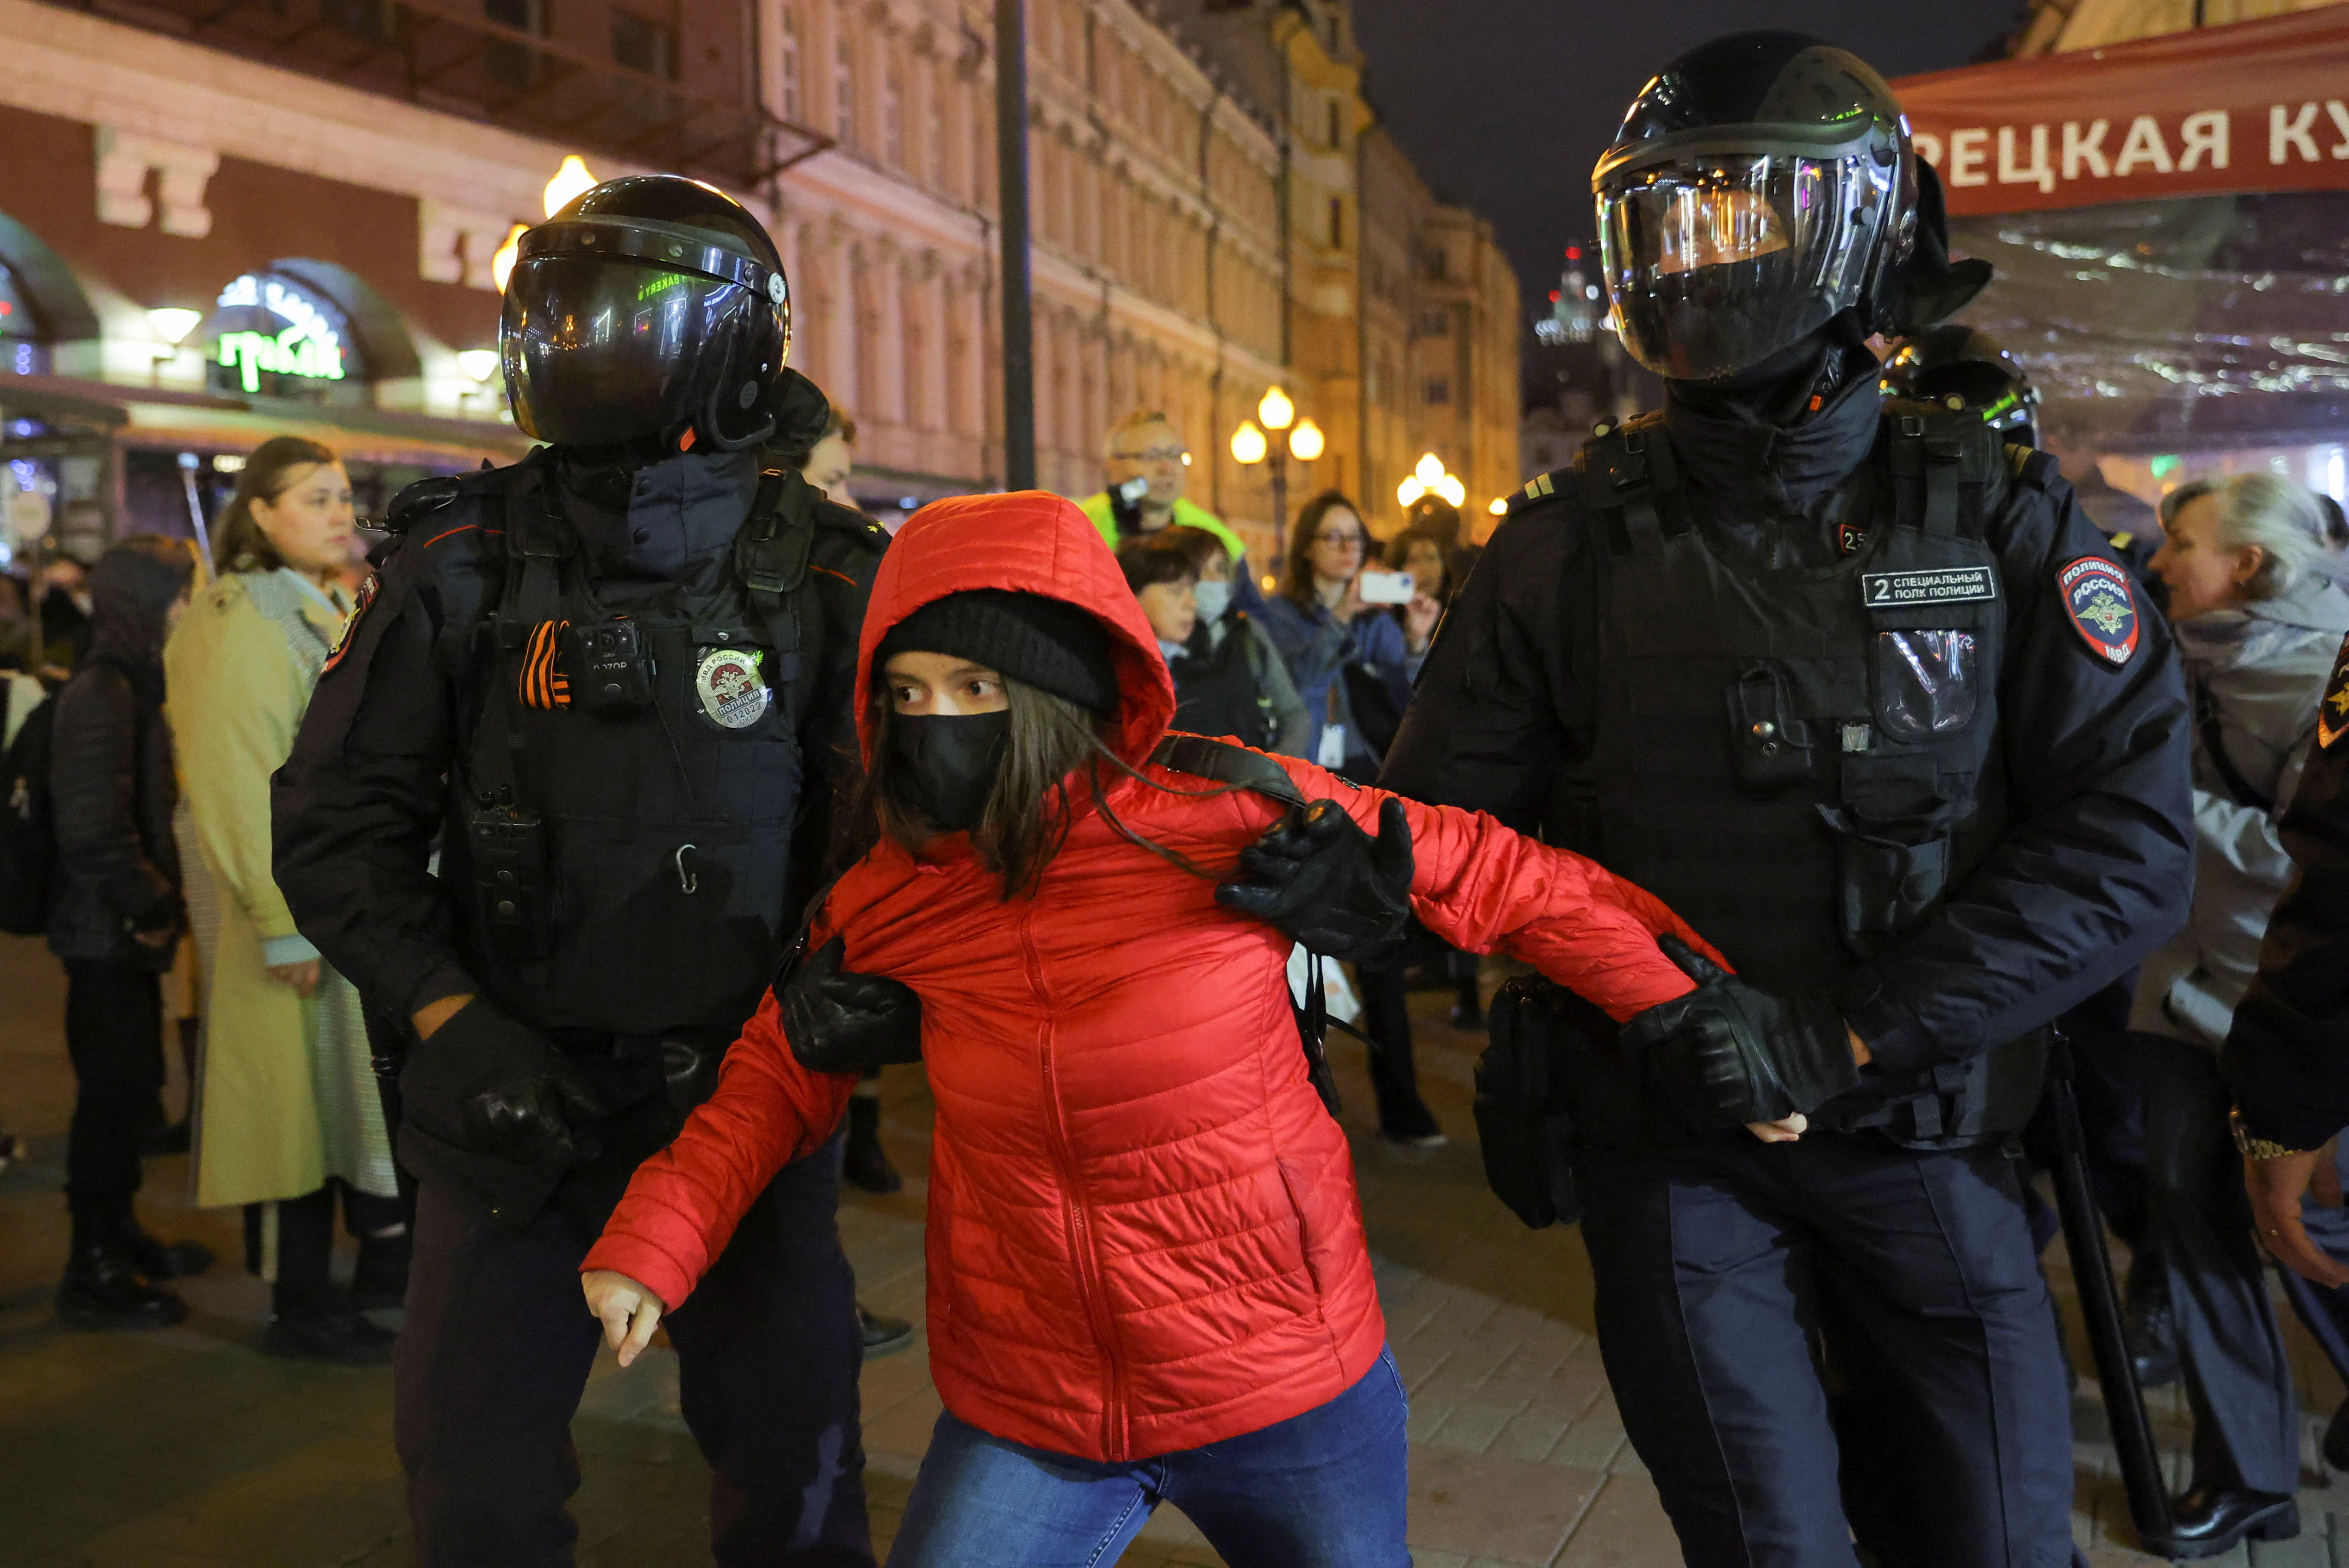 A young woman is detained by Moscow officials (2022. REUTERS/REUTERS PHOTOGRAPHER)